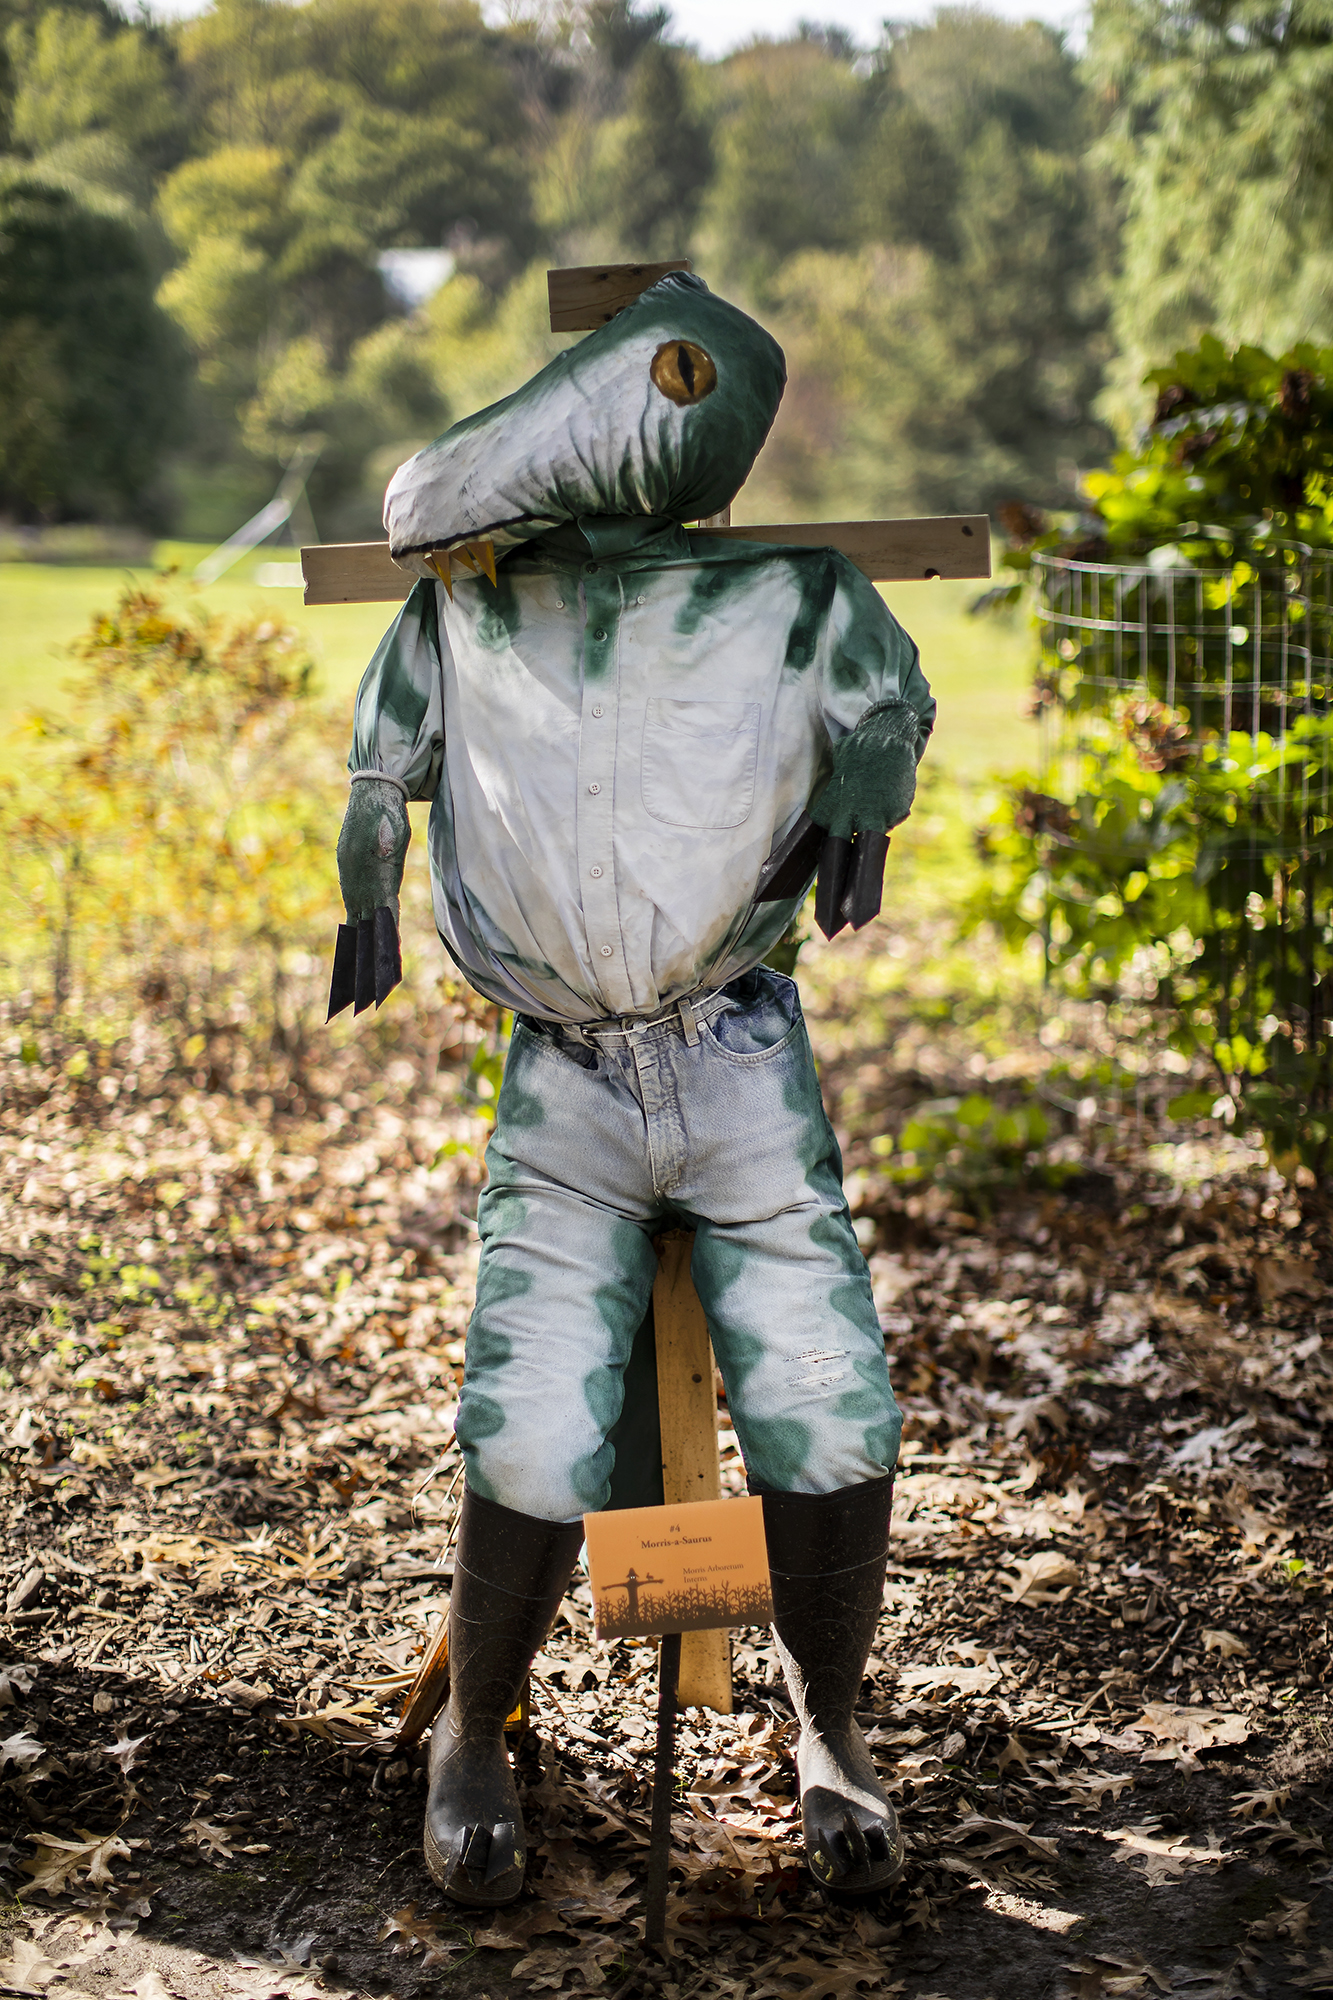 Scarecrows star at Arboretum challenge | Penn Today1333 x 2000